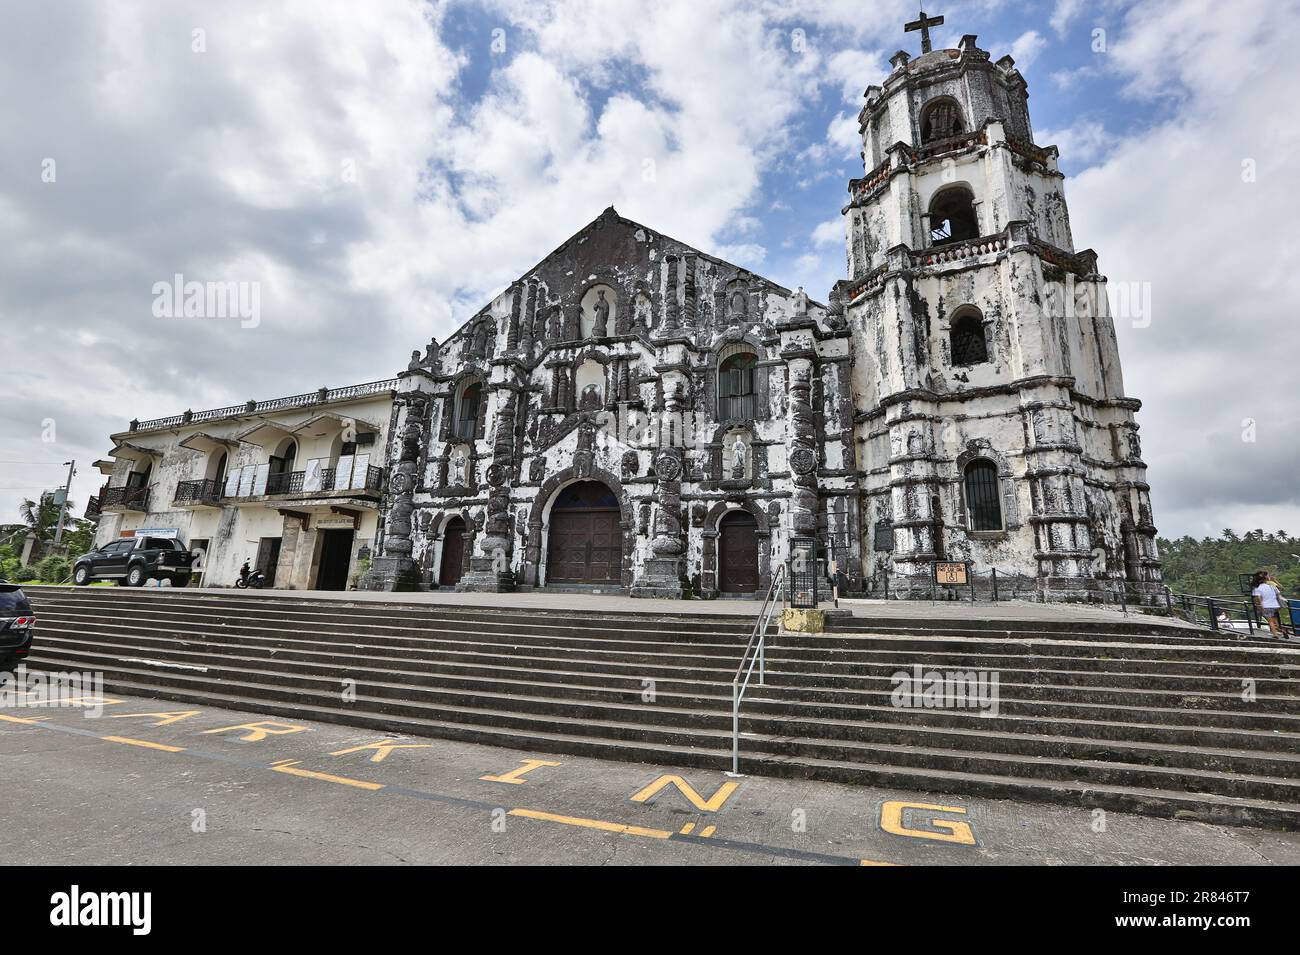 Daraga church convent made with Mount Mayon volcanic rocks, volcano, historical Philippines, Churrigueresque spanish colonial era architectural style Stock Photo